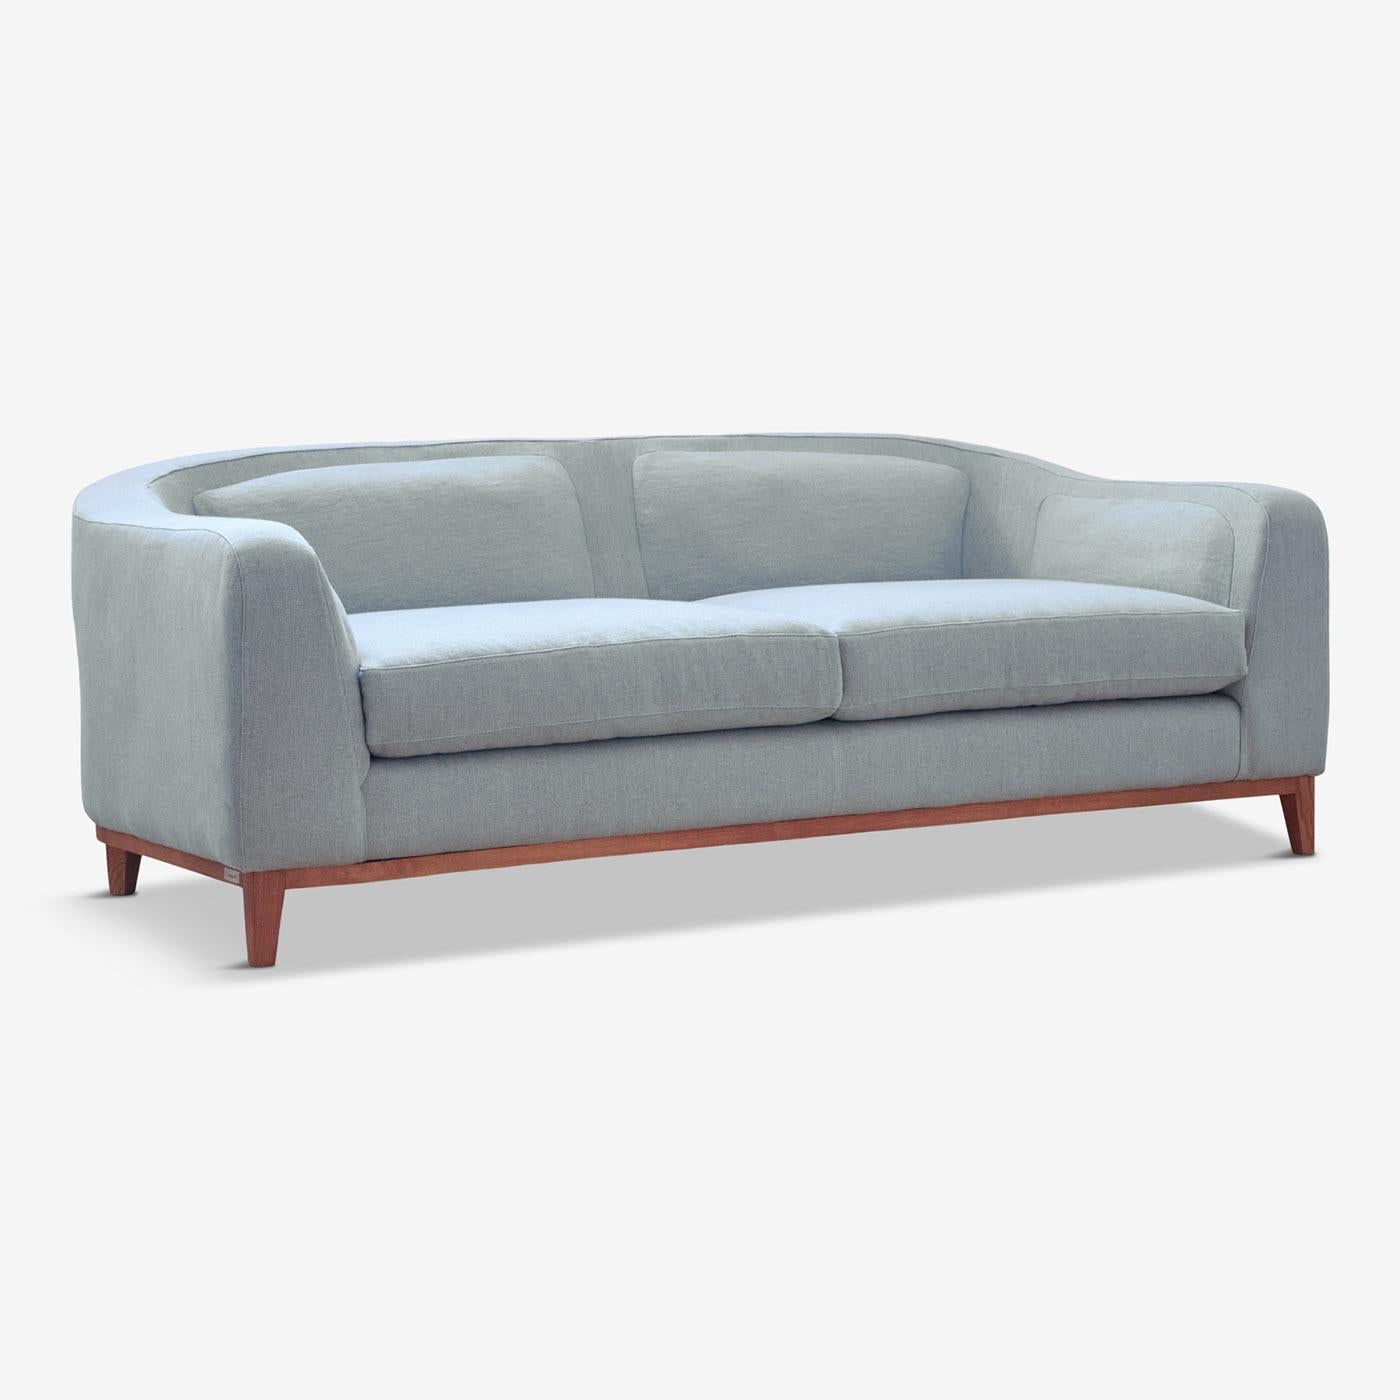 Contemporary and compact, this playful sofa by Brian Sironi adds style to any room. Featuring a mid-century classic design with a modern twist, the legs and entire framework are crafted in solid beech wood and the seat and back have practical